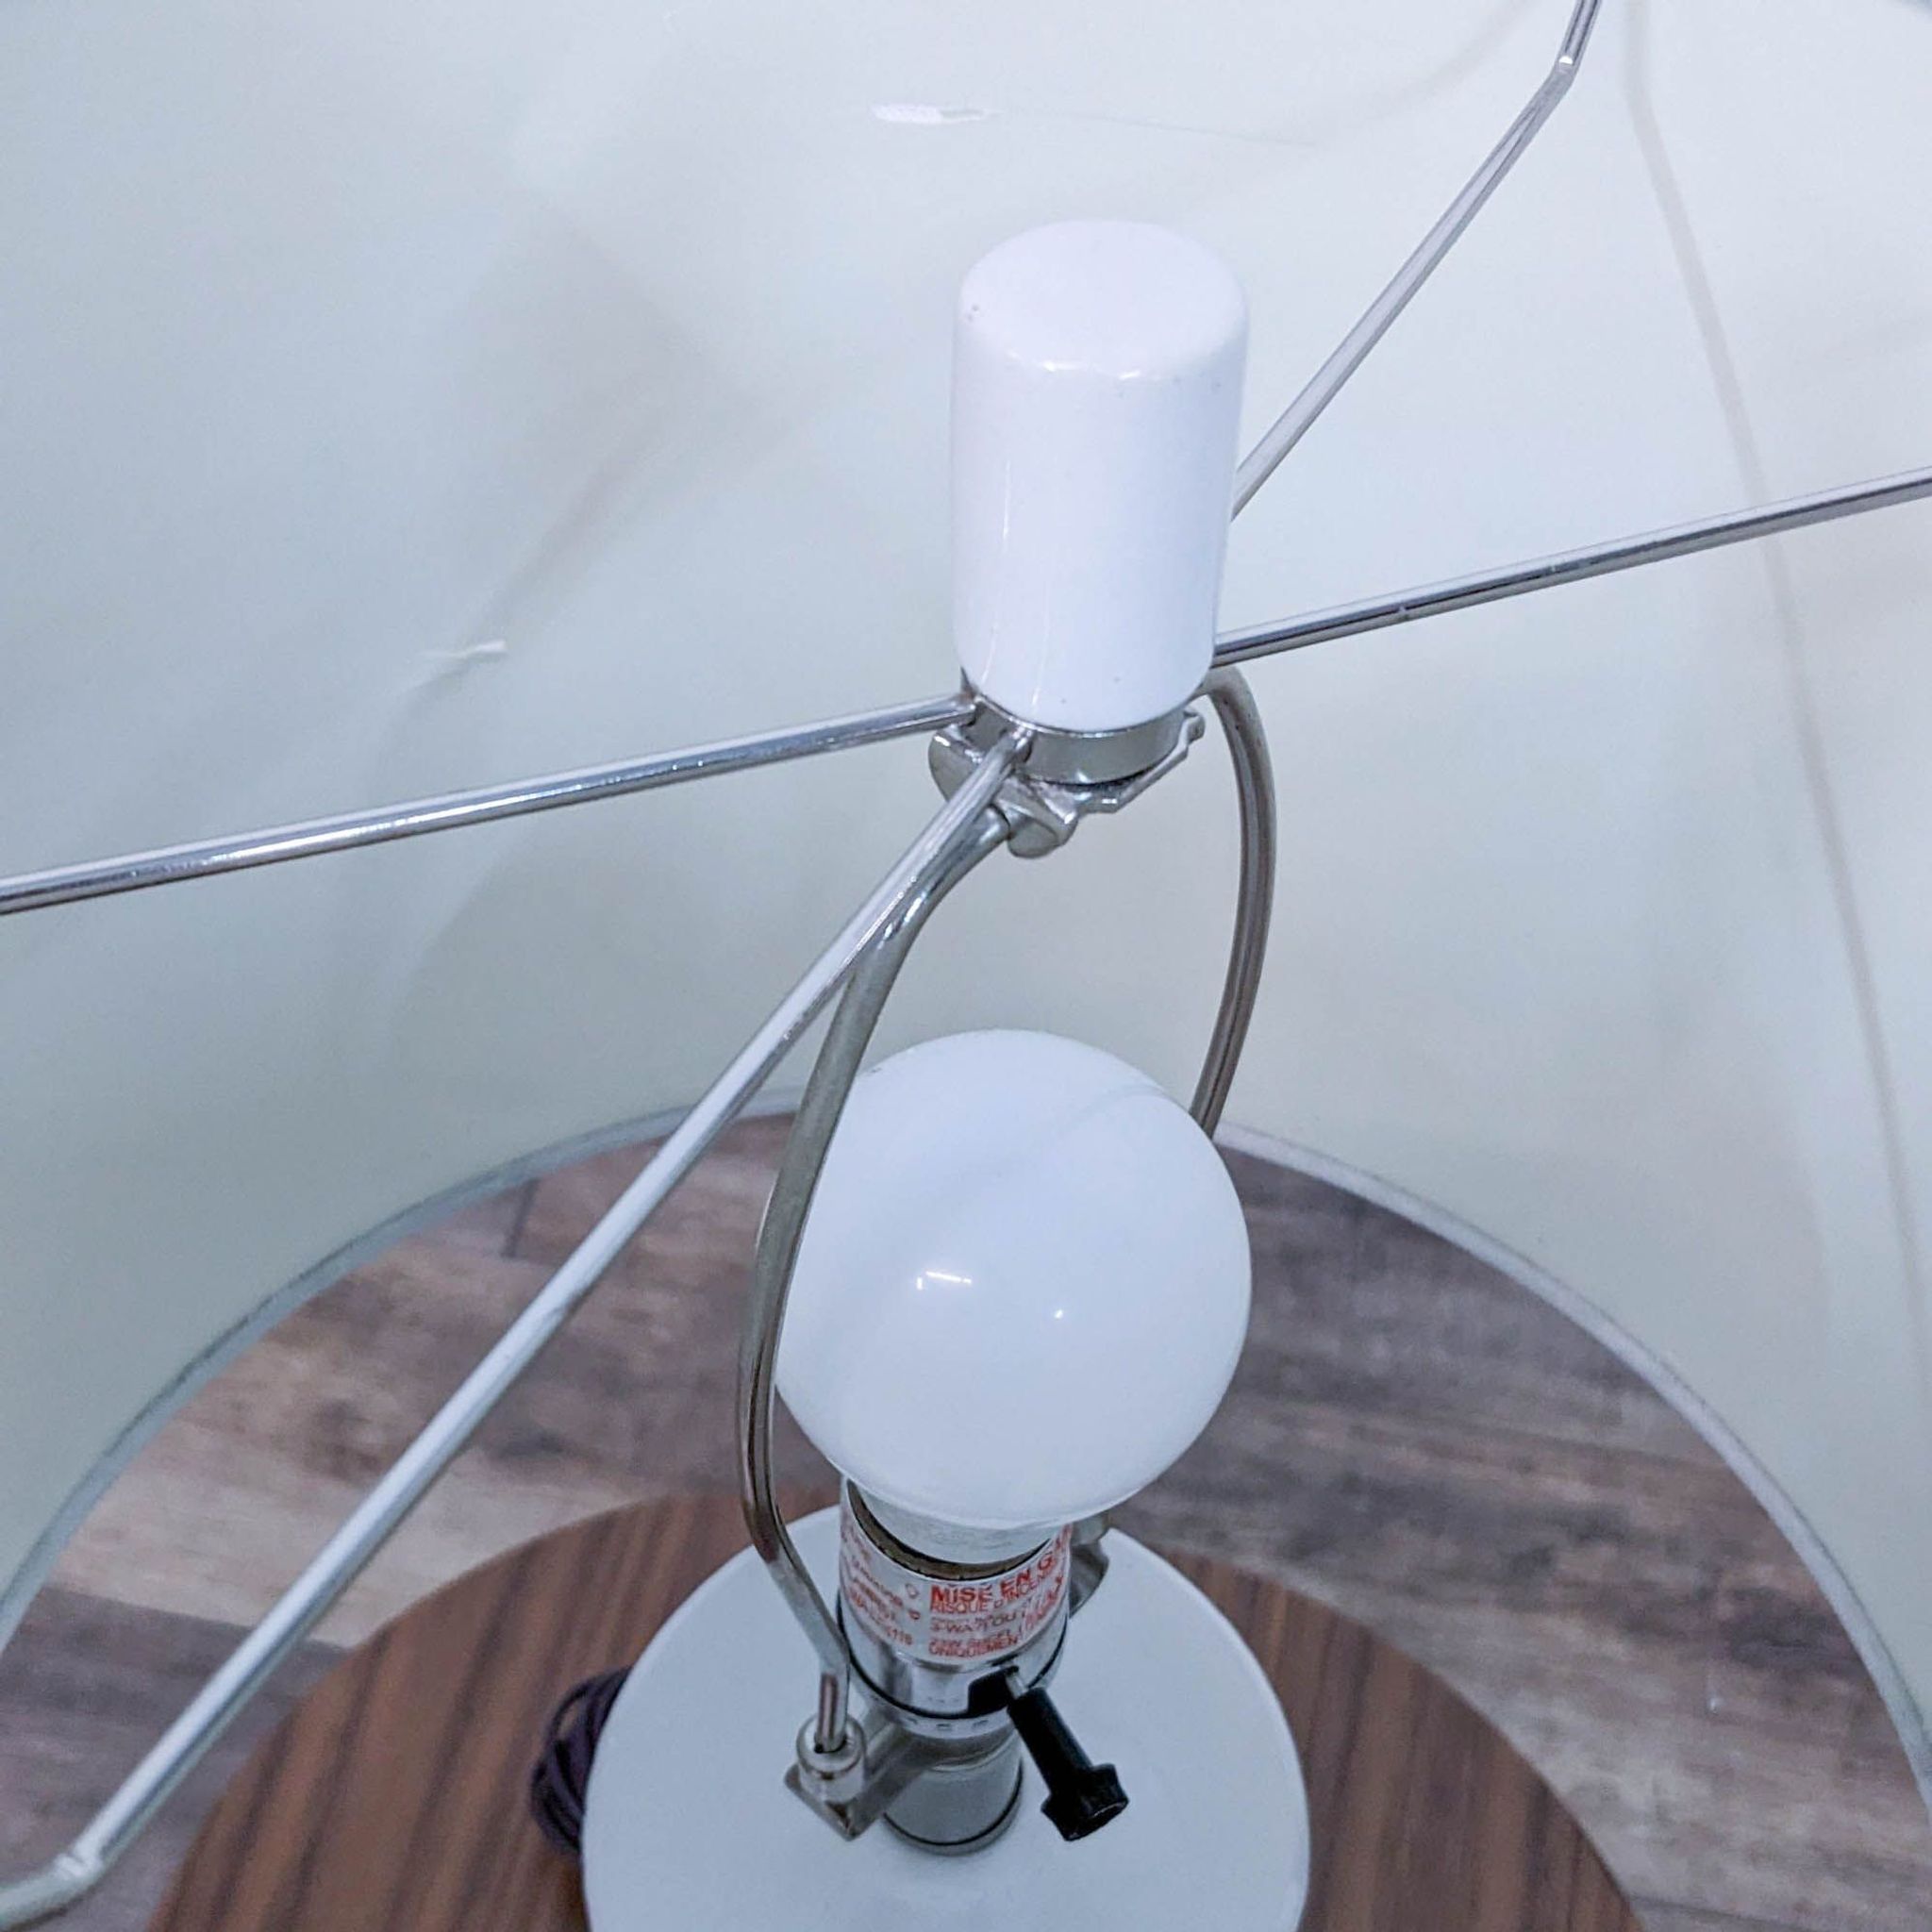 Modern Reperch desk lamp with a curved metal frame supporting a white round bulb, on a clear glass surface.